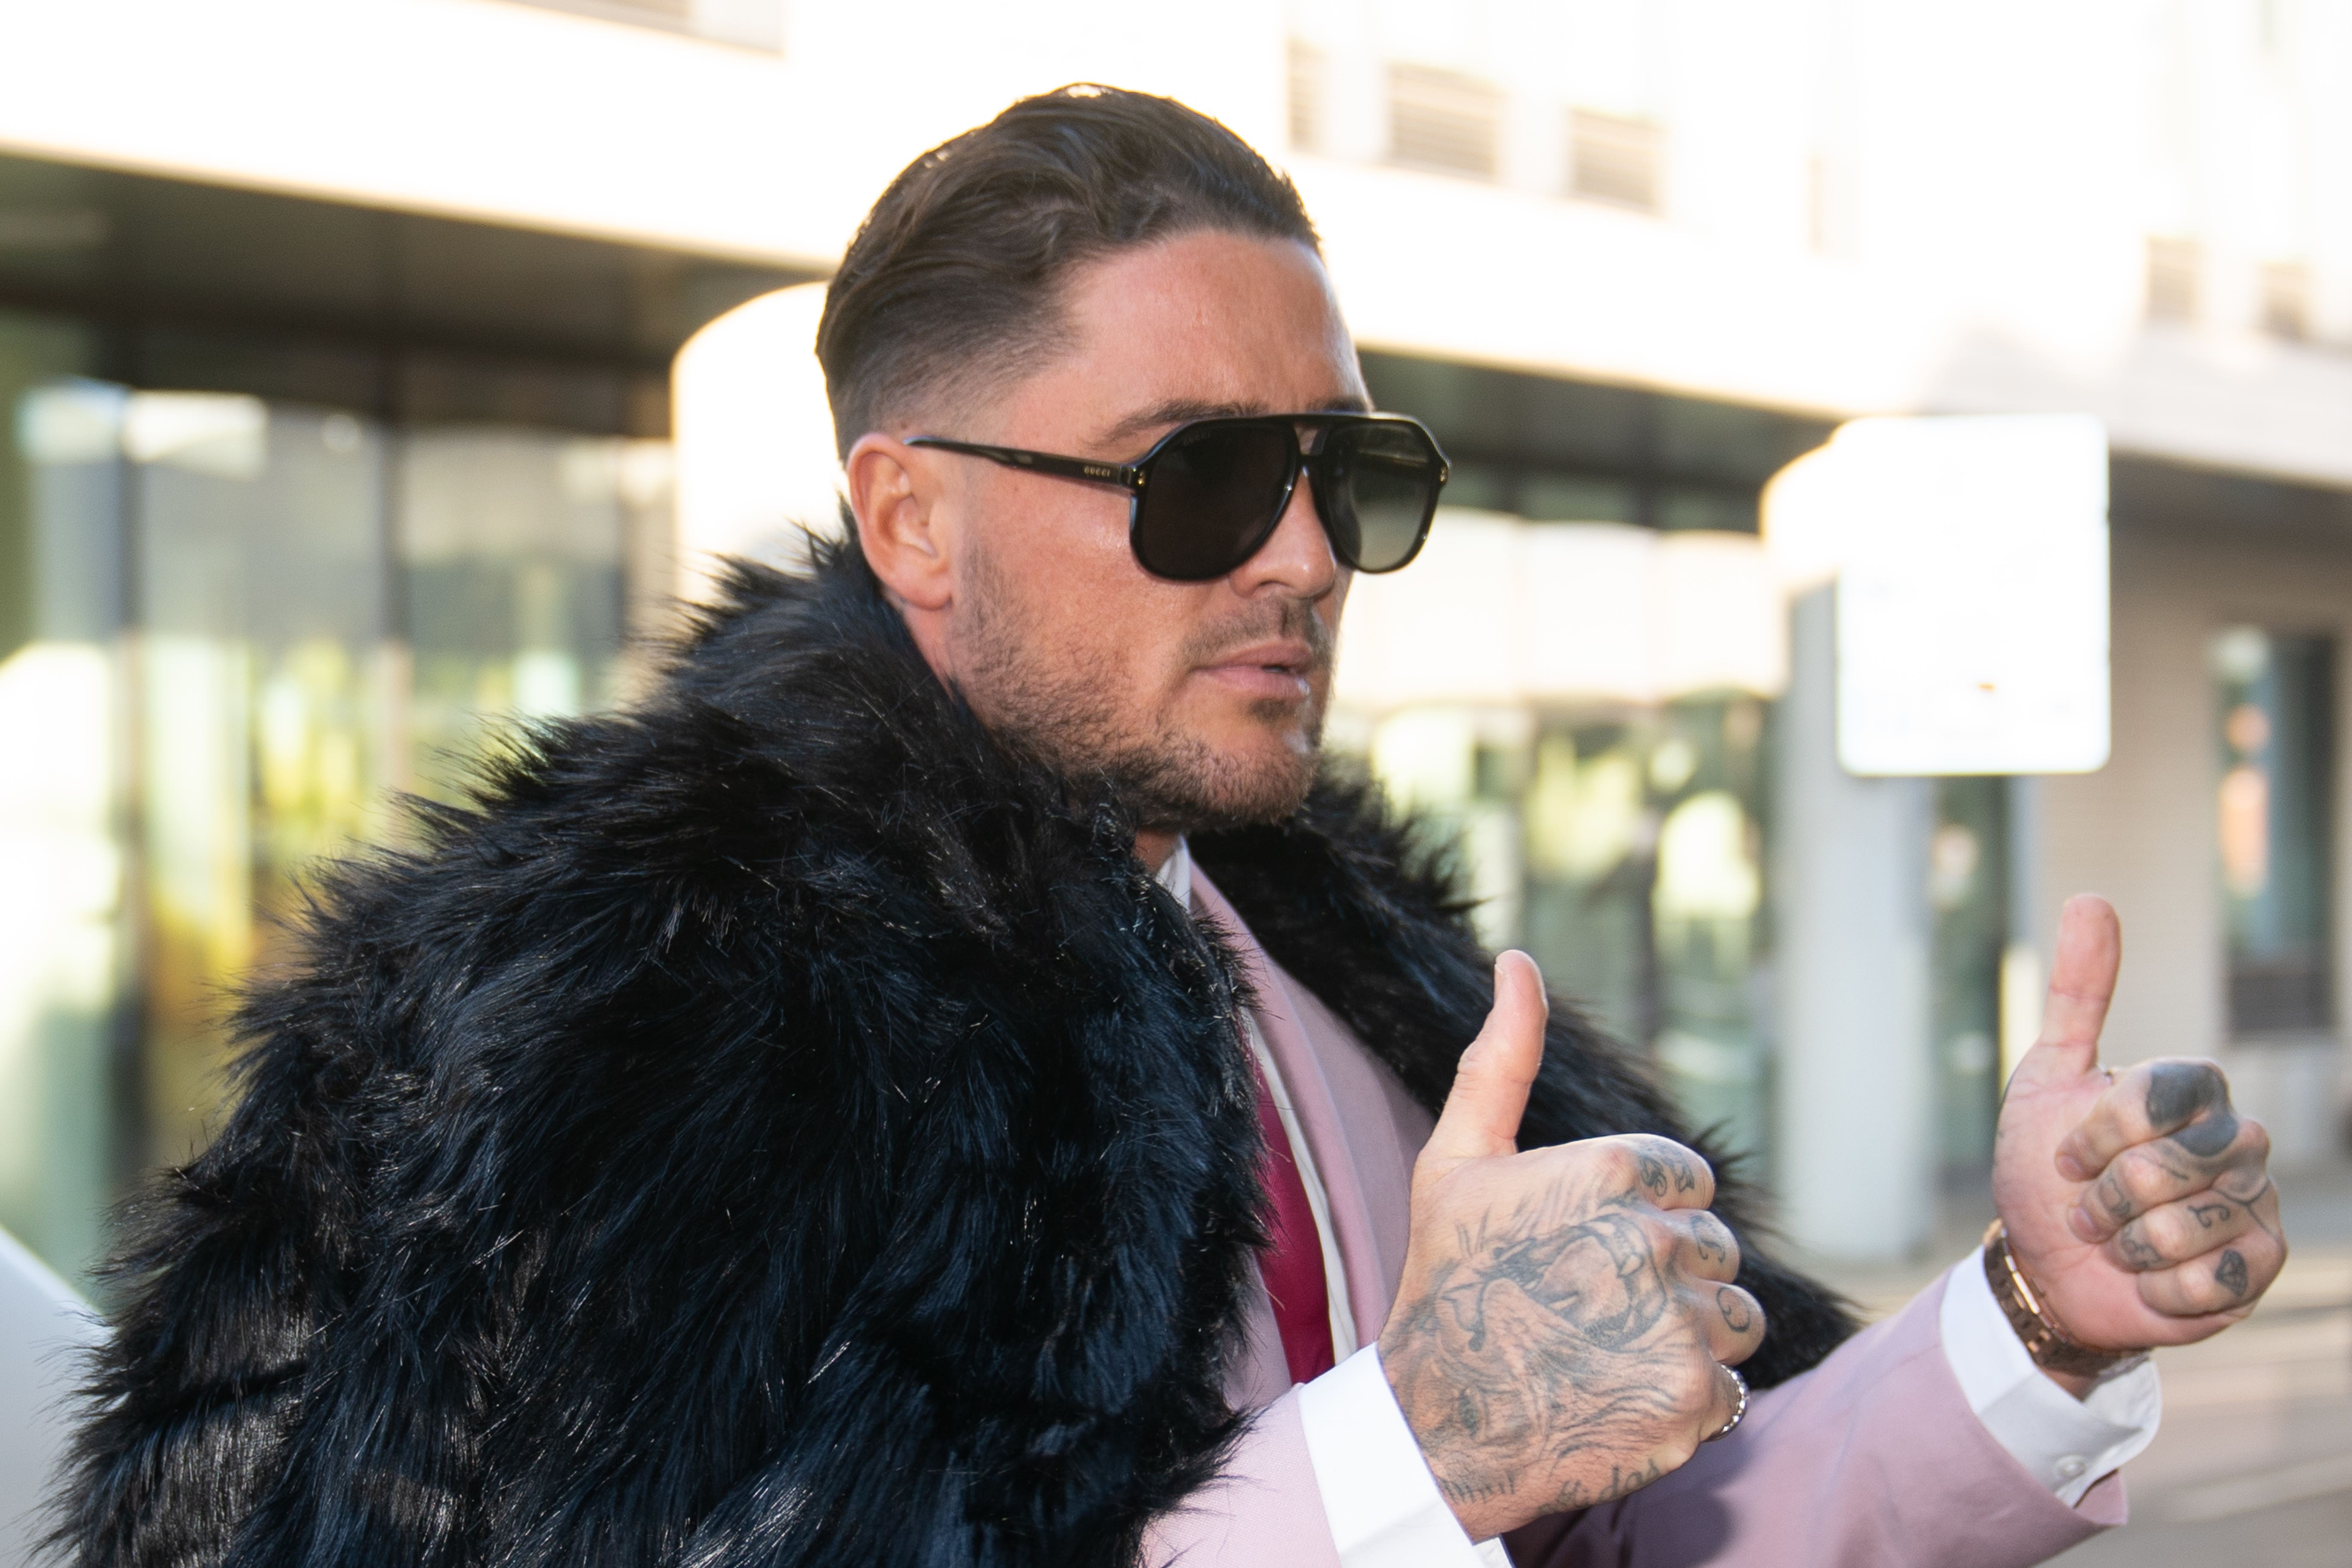 Stephen Bear upped cost of OnlyFans subscription after uploading  